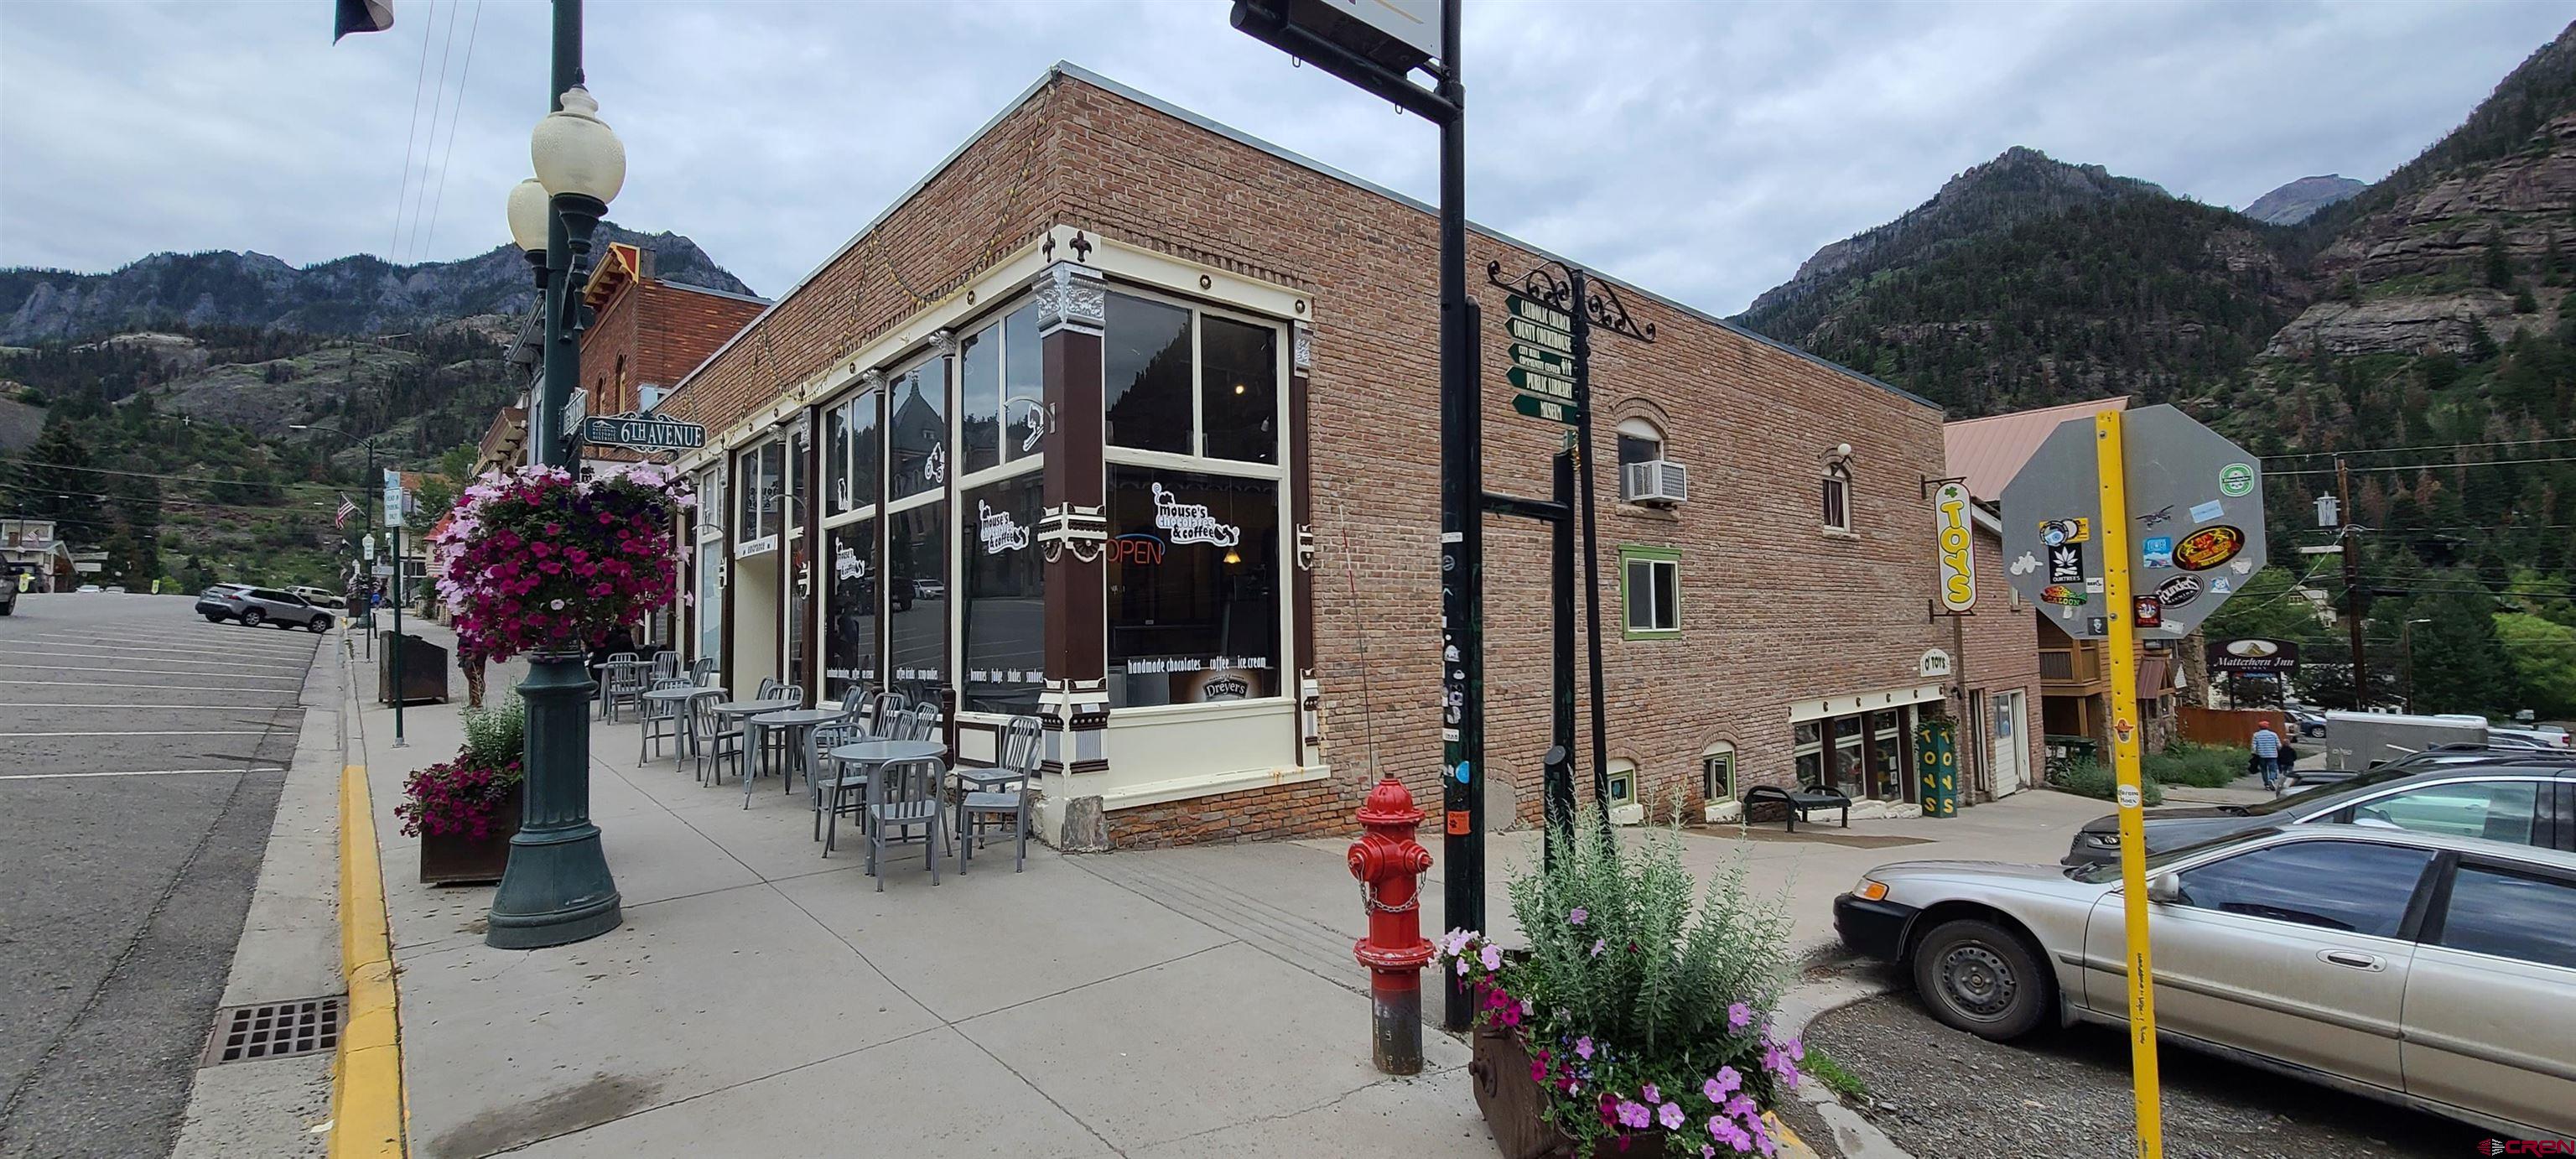 Own a premier building in Ouray Colorado. Incredible opportunity for a creative entrepreneur. Building has one residential unit and one commercial rental on 6th Avenue and the retail and production areas of the beloved Mouse's Chocolates. The lower level can be adapted to a variety of different residential or commercial uses. Mouse's Chocolates is Renowned for great house roasted coffee, Belgian truffles, and tasty Ice Cream treats. This is the premier corner in Ouray An additional floor could be built on the existing structure under the Ouray code and height limit of 35 feet.  The business of Mouse''s Chocolates is for sale under a separate listing.